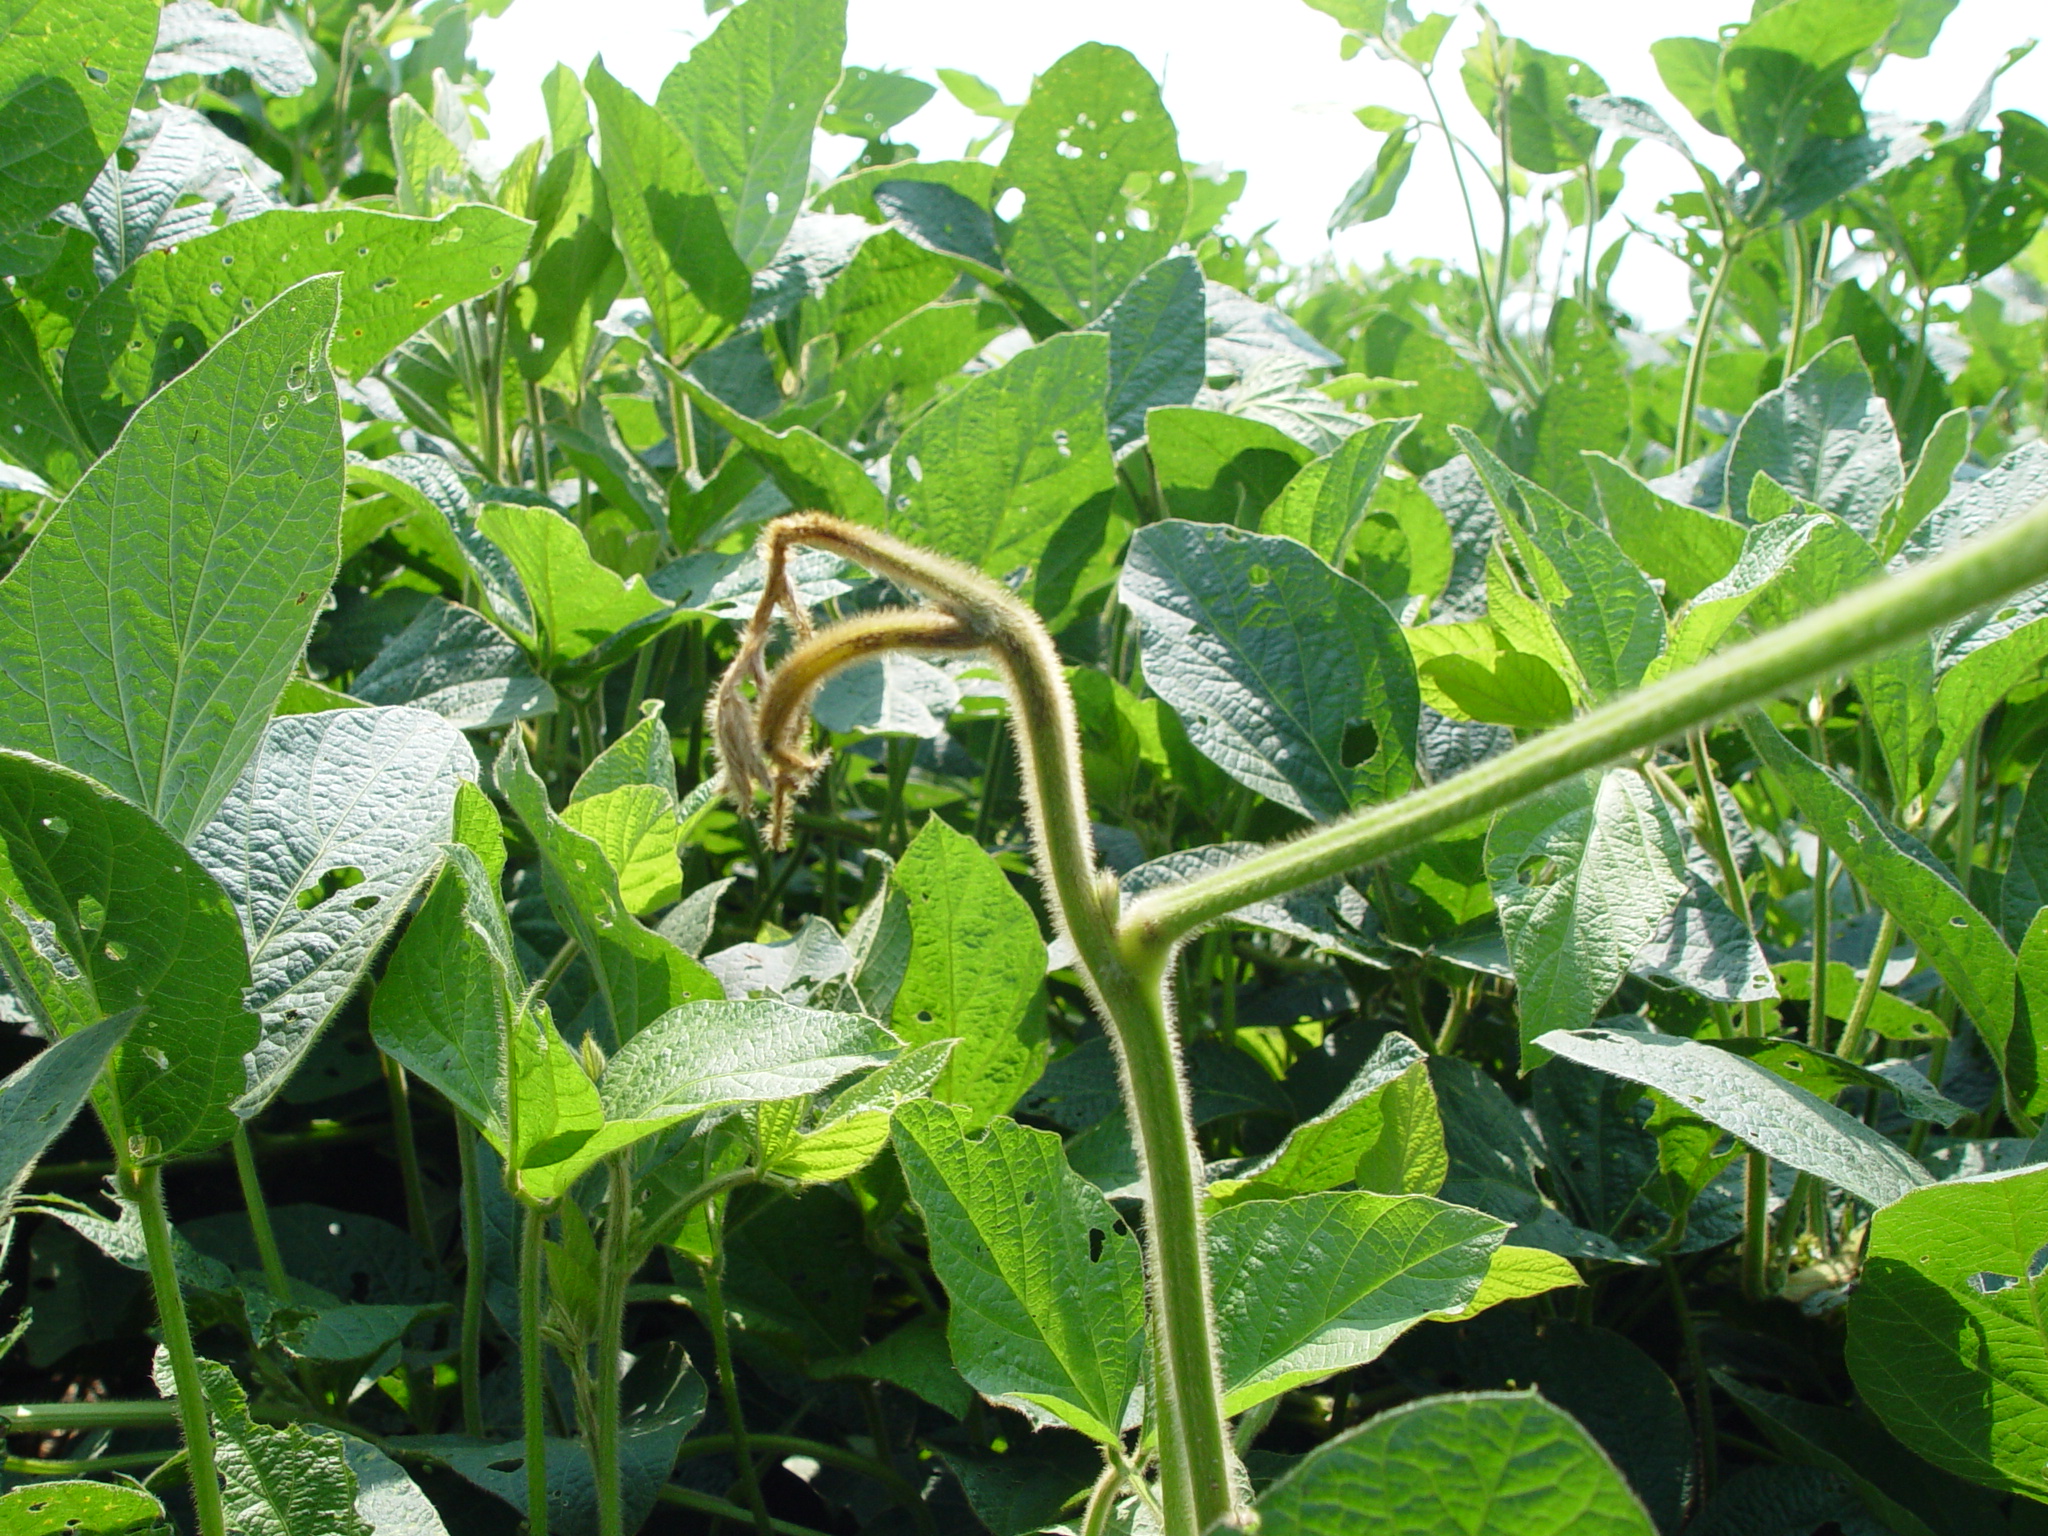 Shepherd's crooking can be a prominent symptom of tobacco ringspot.